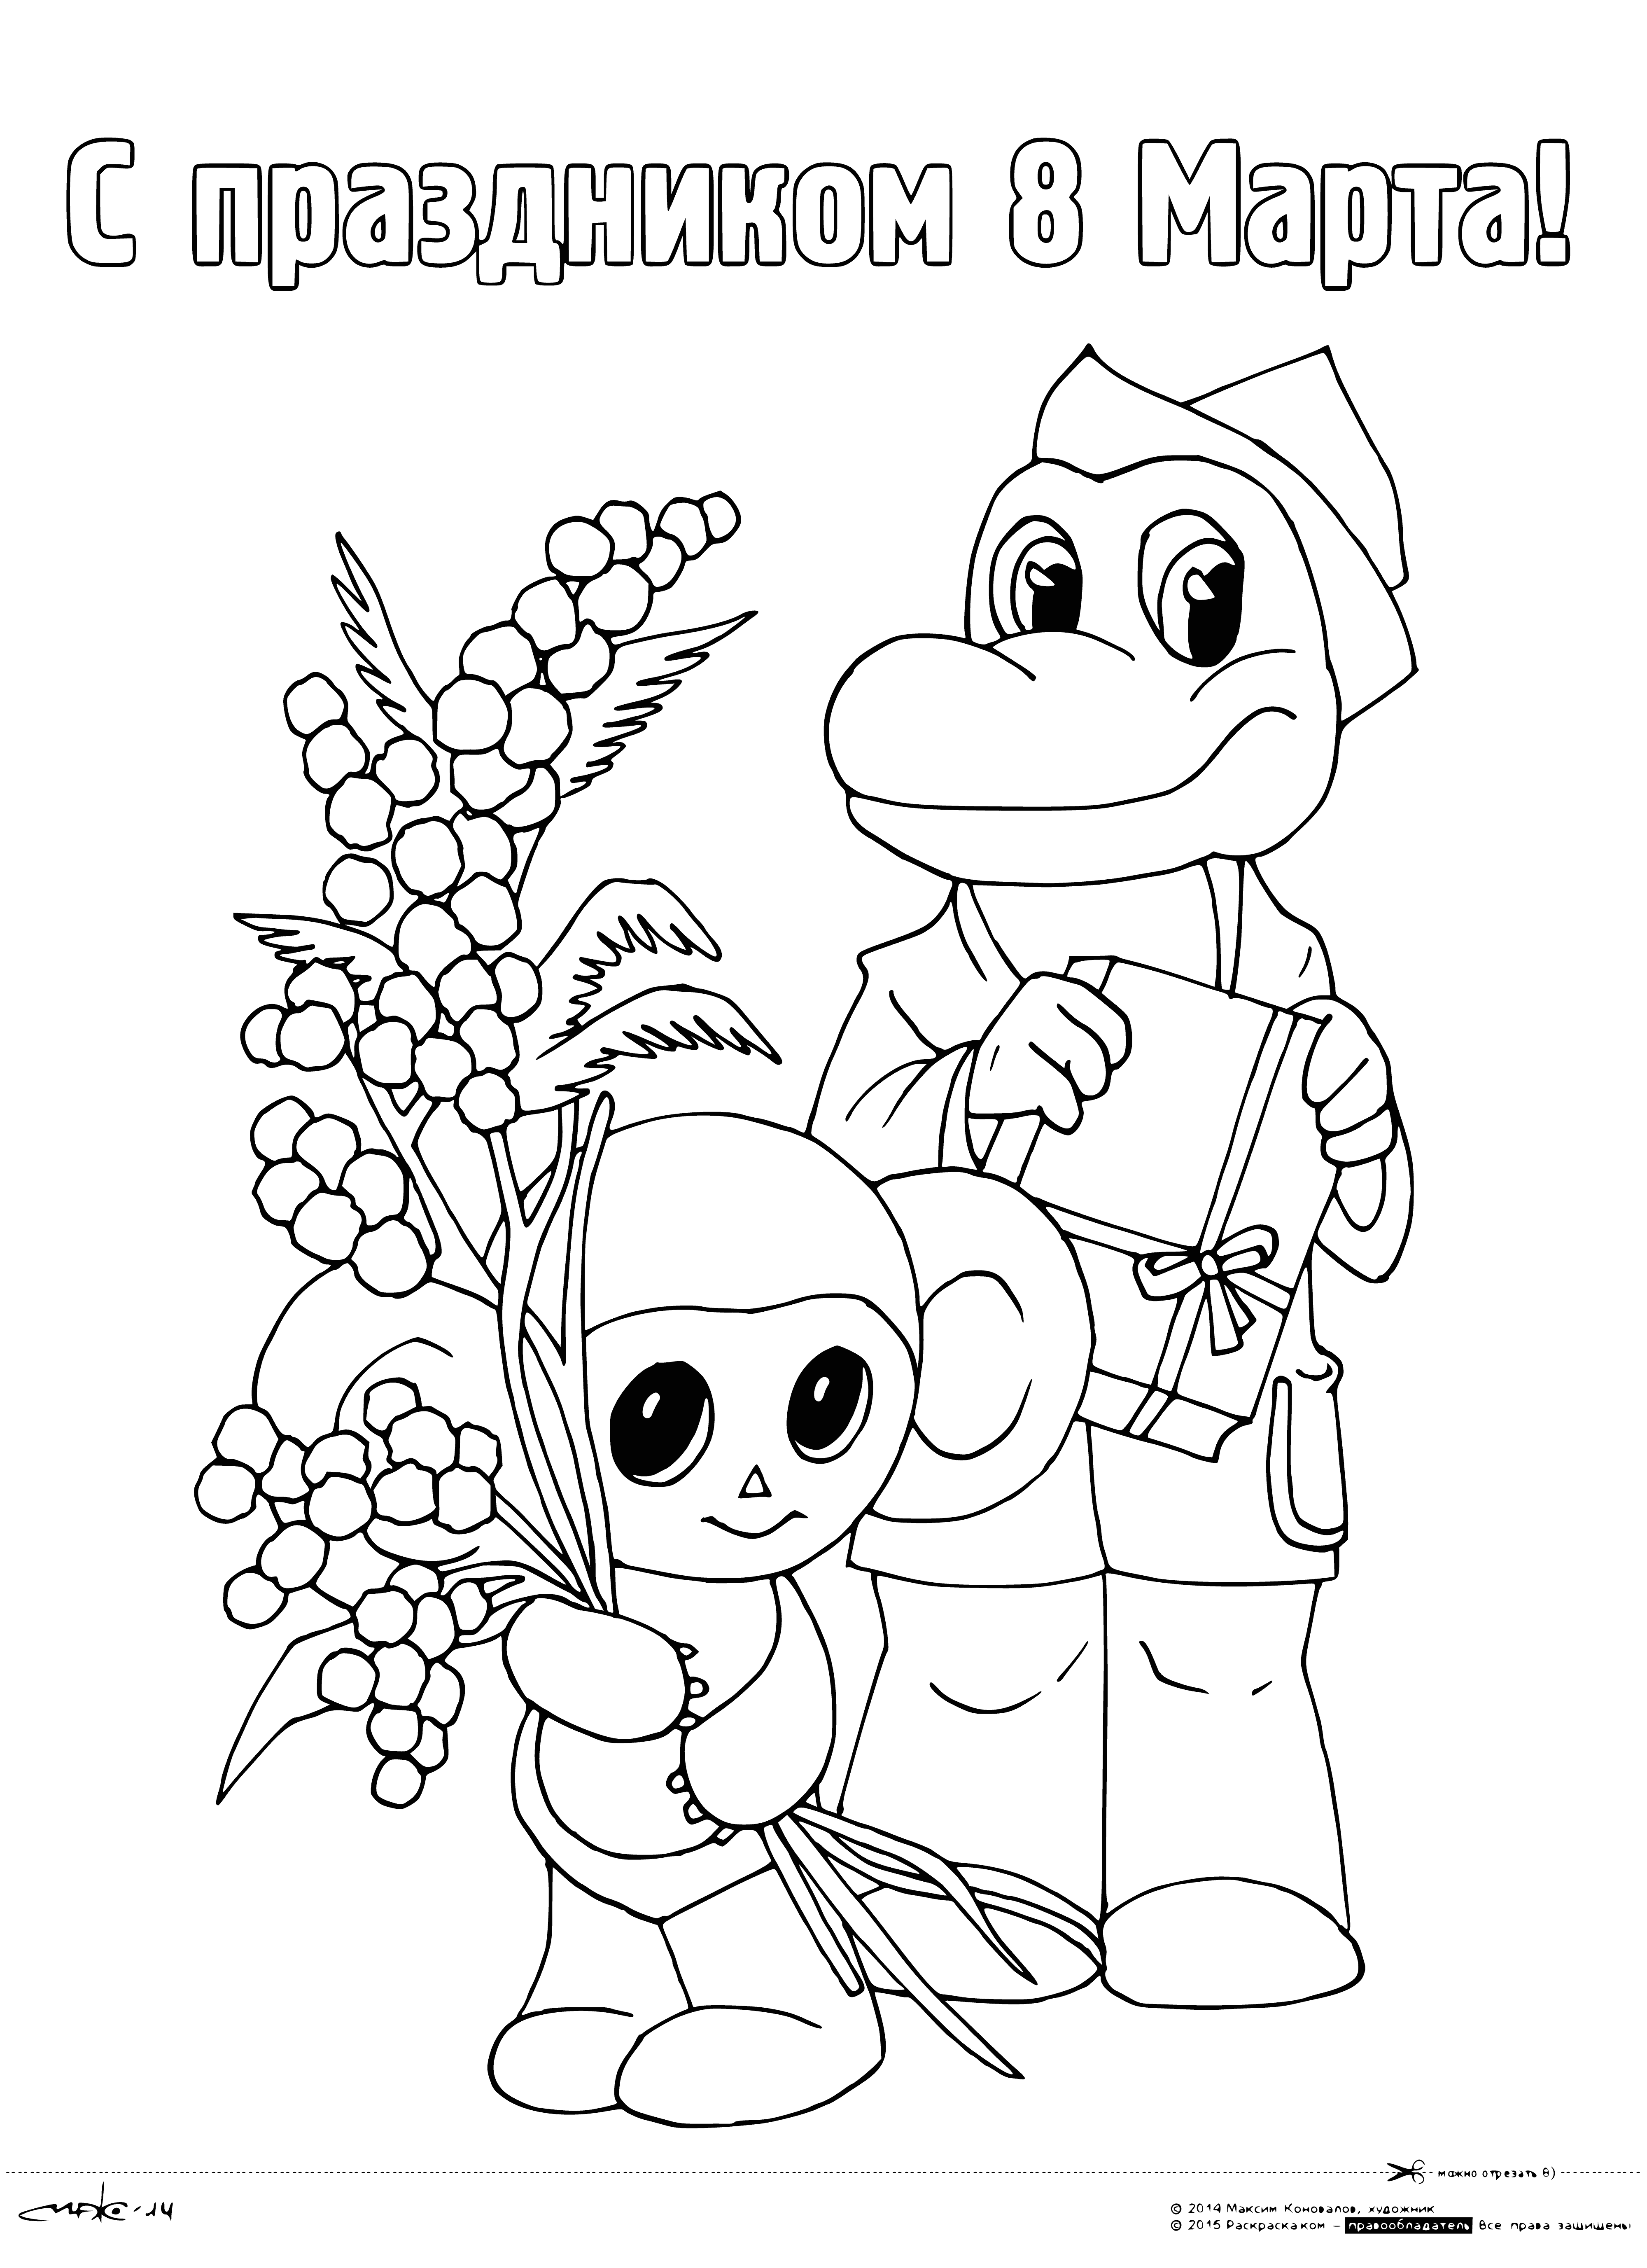 coloring page: Two cheerful characters, a crocodile and a chubby creature, are sitting on a bench beneath a tree in a blue sky.